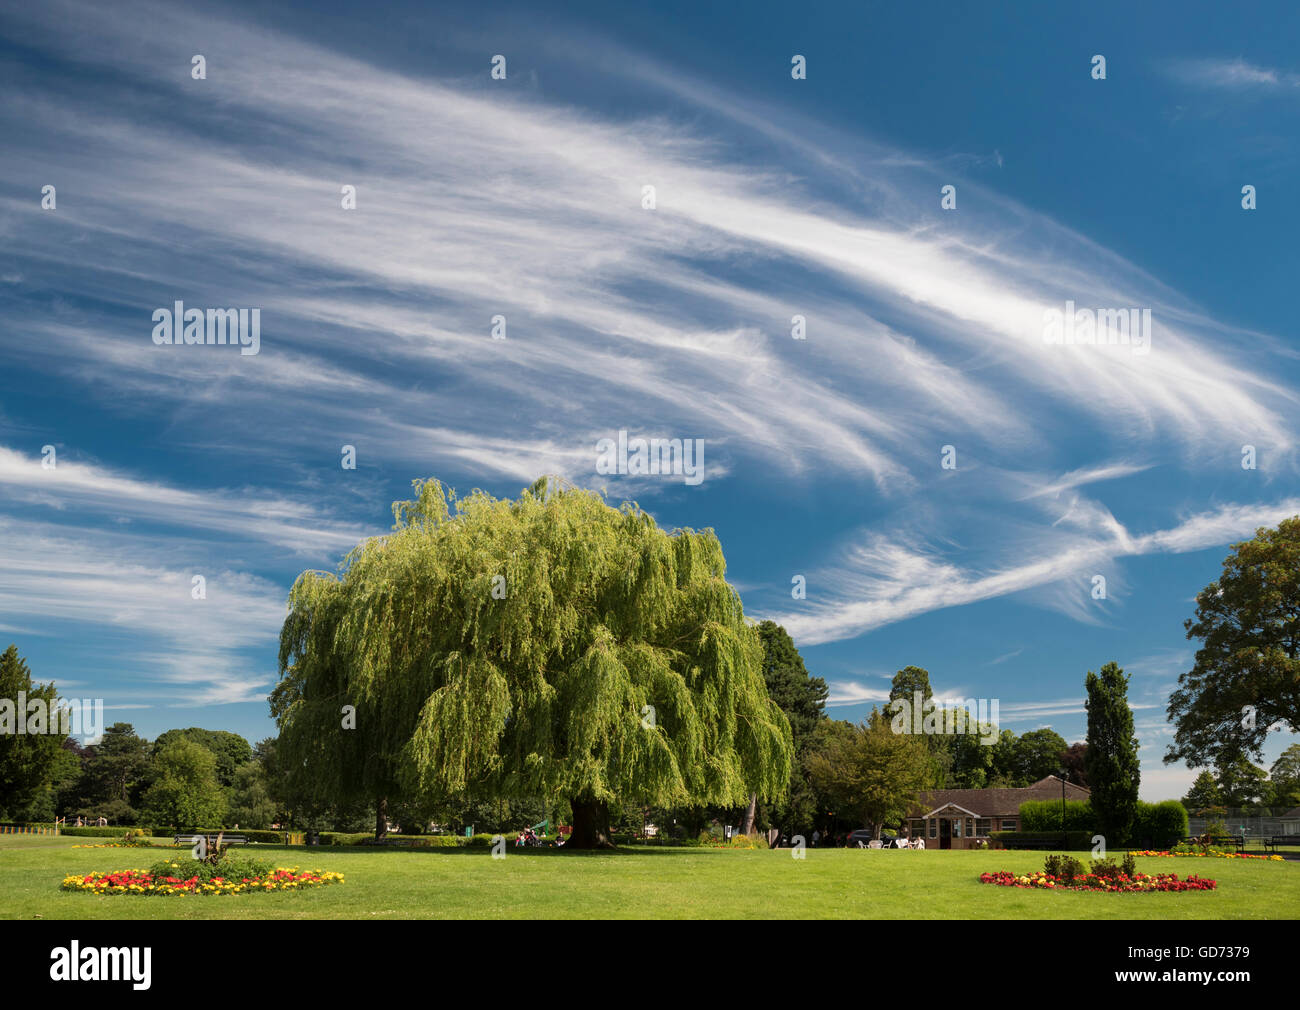 Spectacular cloud formations over Central Park, Peterborough, Cambridgeshire, England Stock Photo